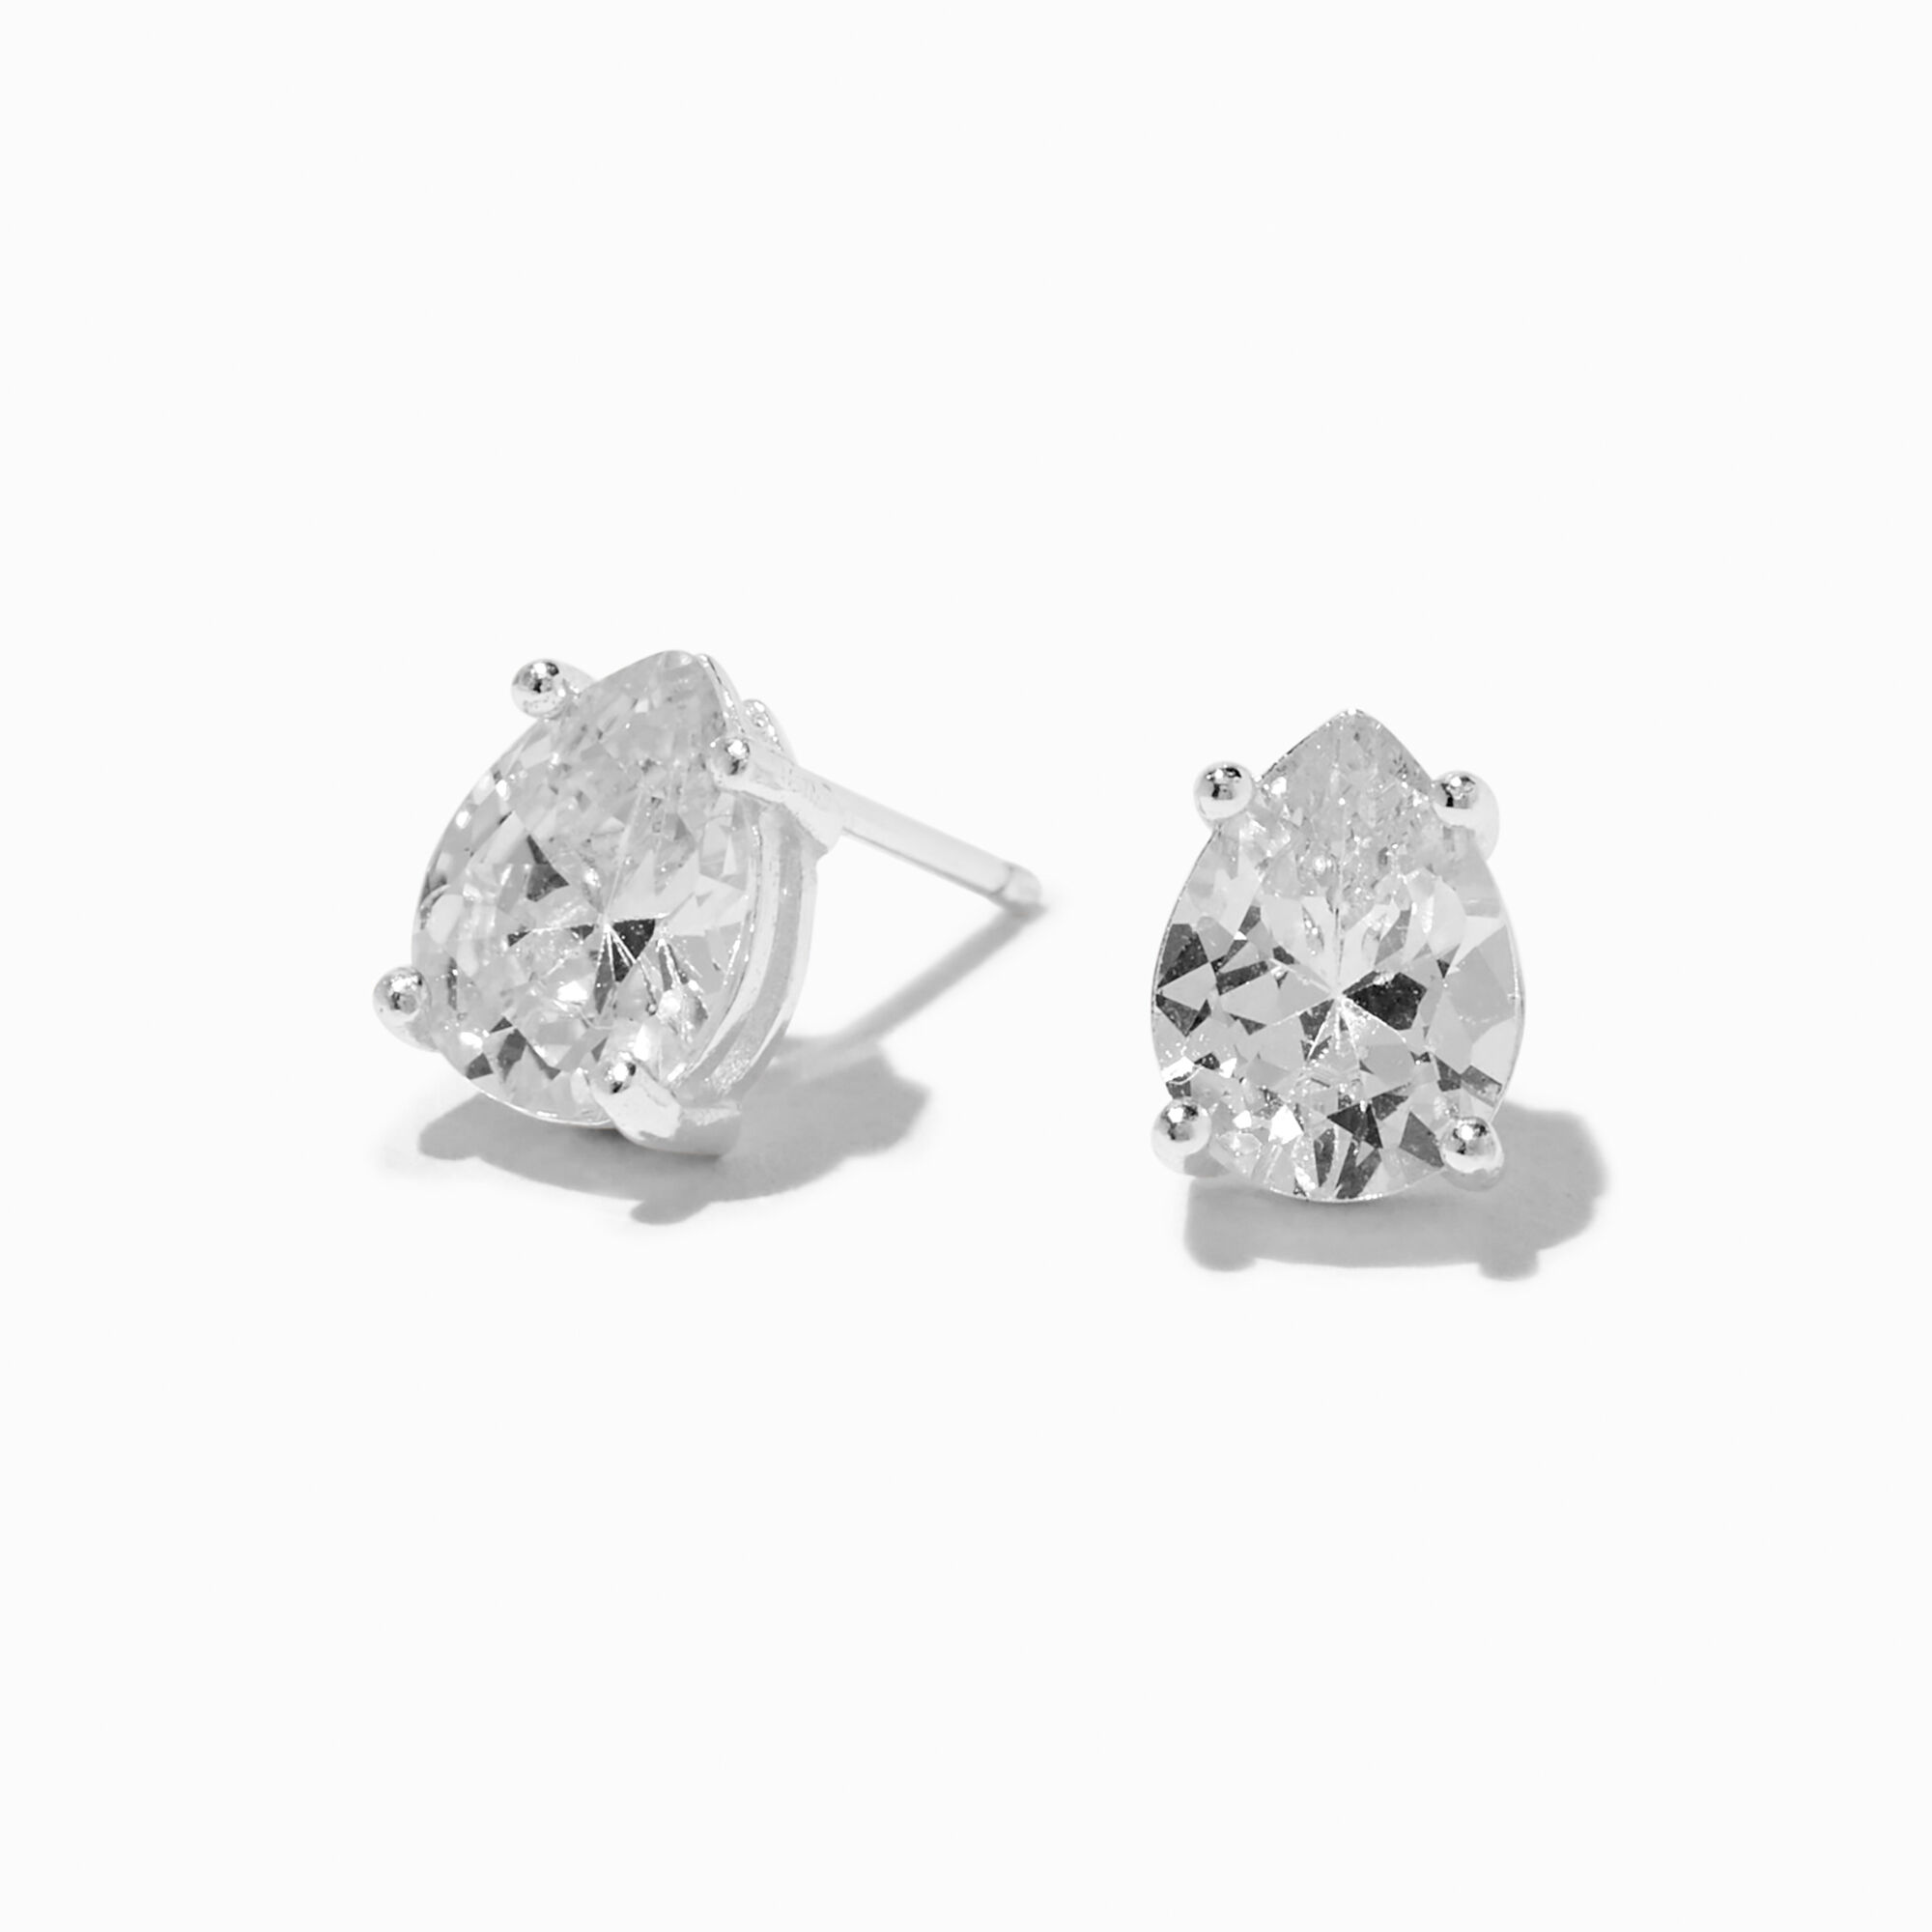 View C Luxe By Claires 8MM Cubic Zirconia Pear Stud Earrings Silver information